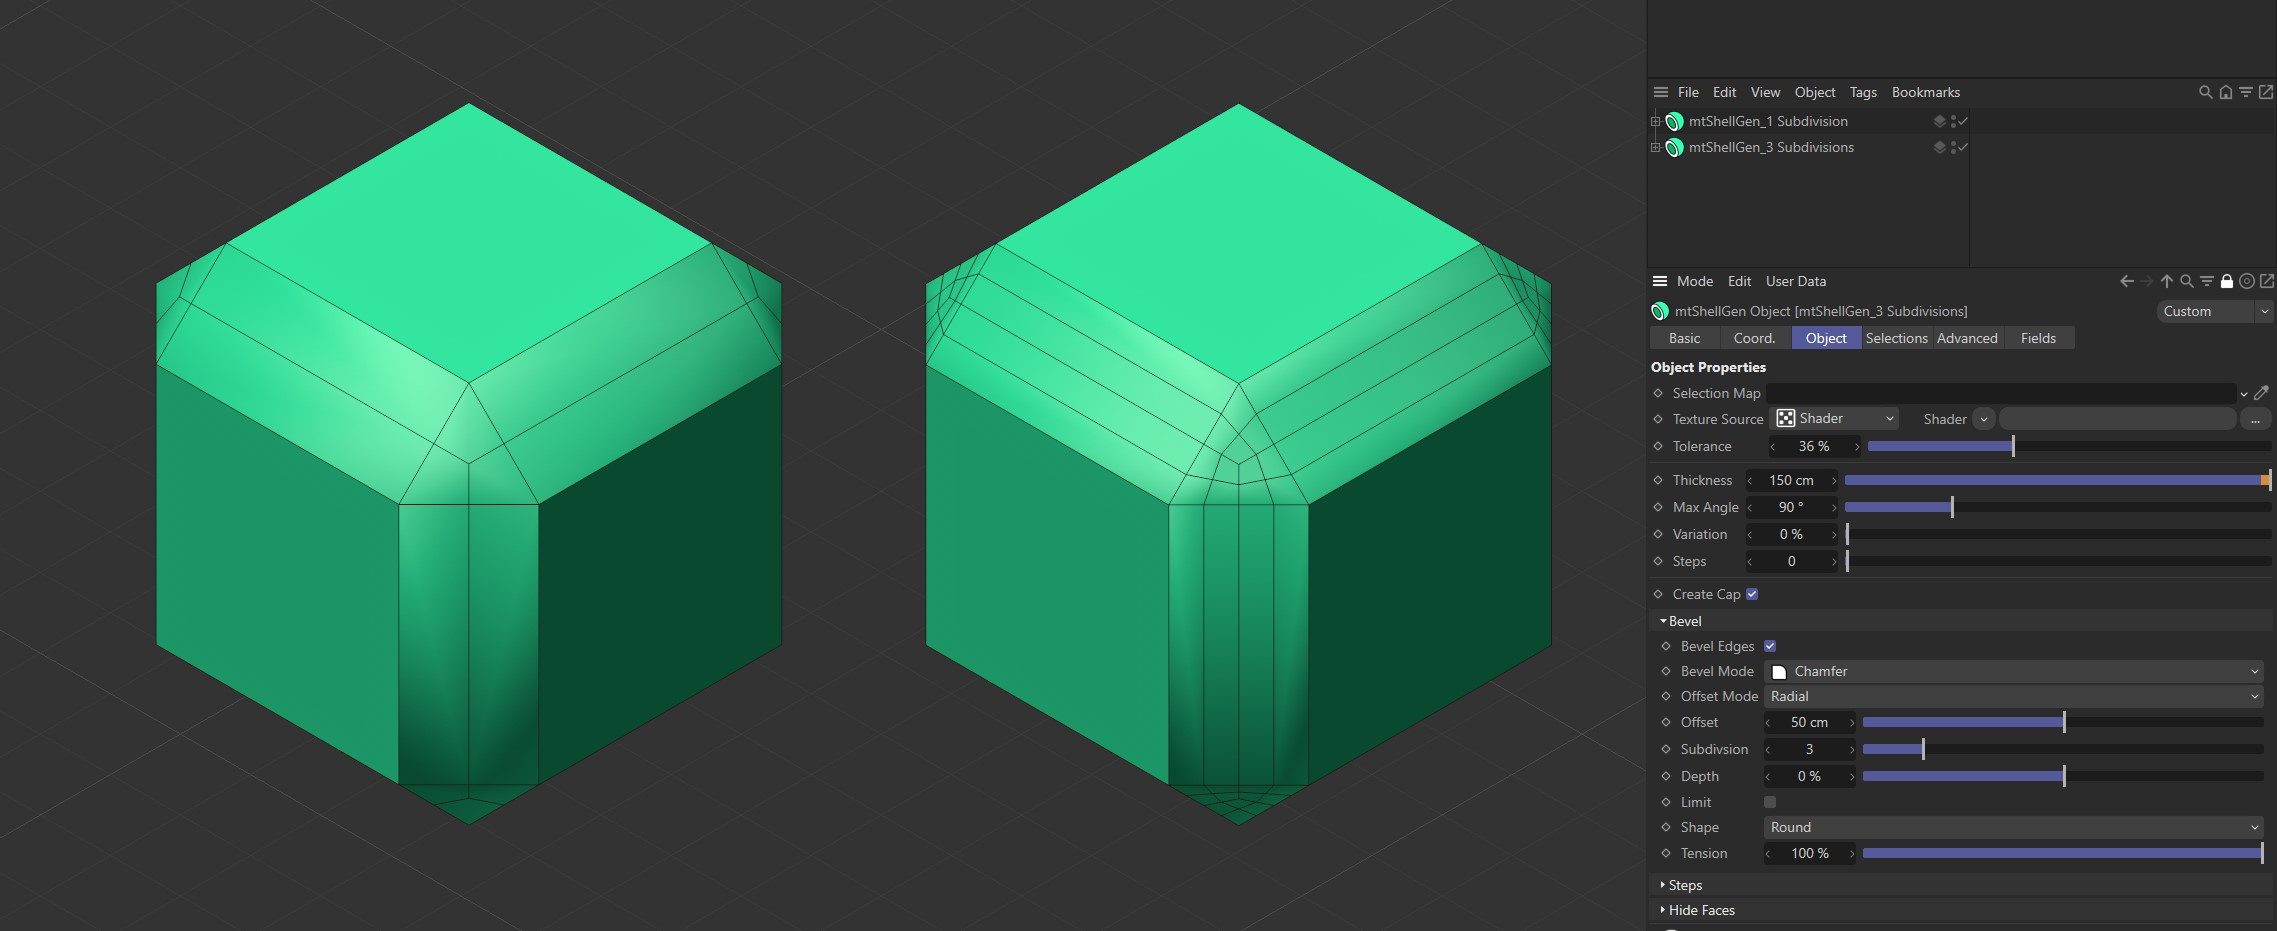 The first Cube has Subdivision set to one and the second Cube is set to three.